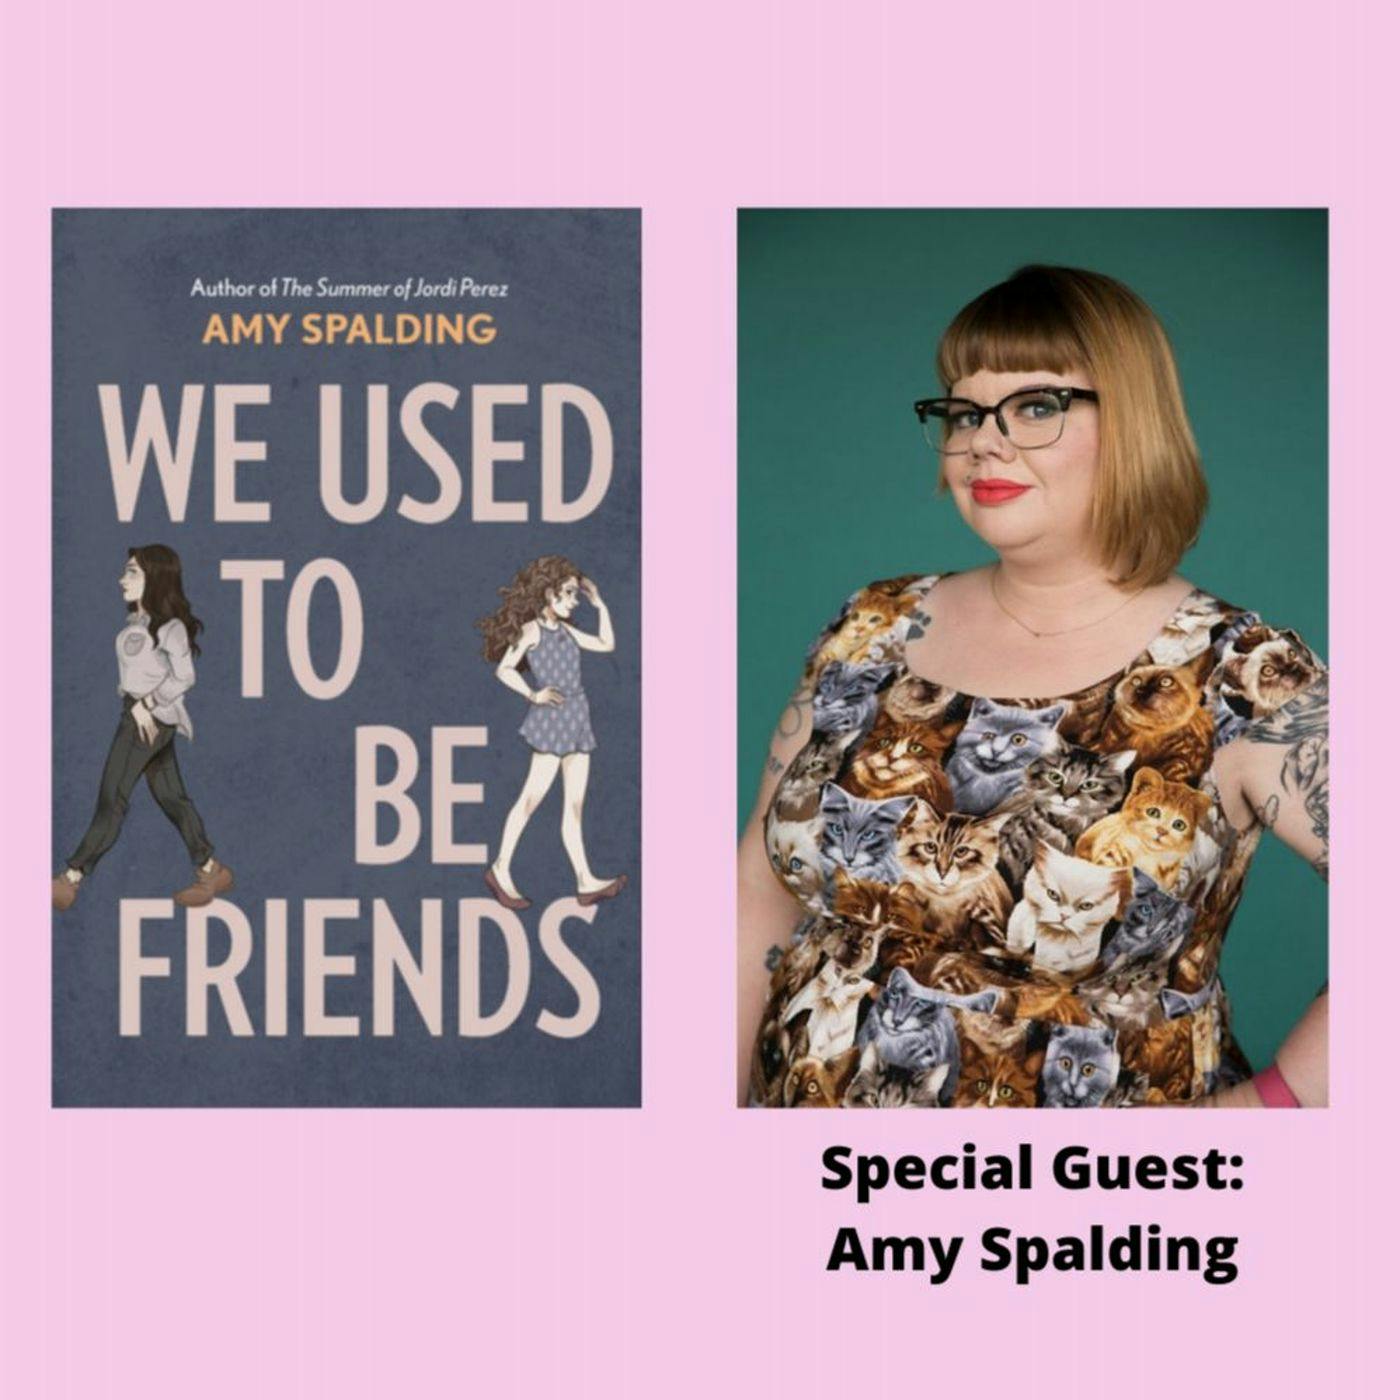 Friendship and Chuck Tingle with Amy Spalding